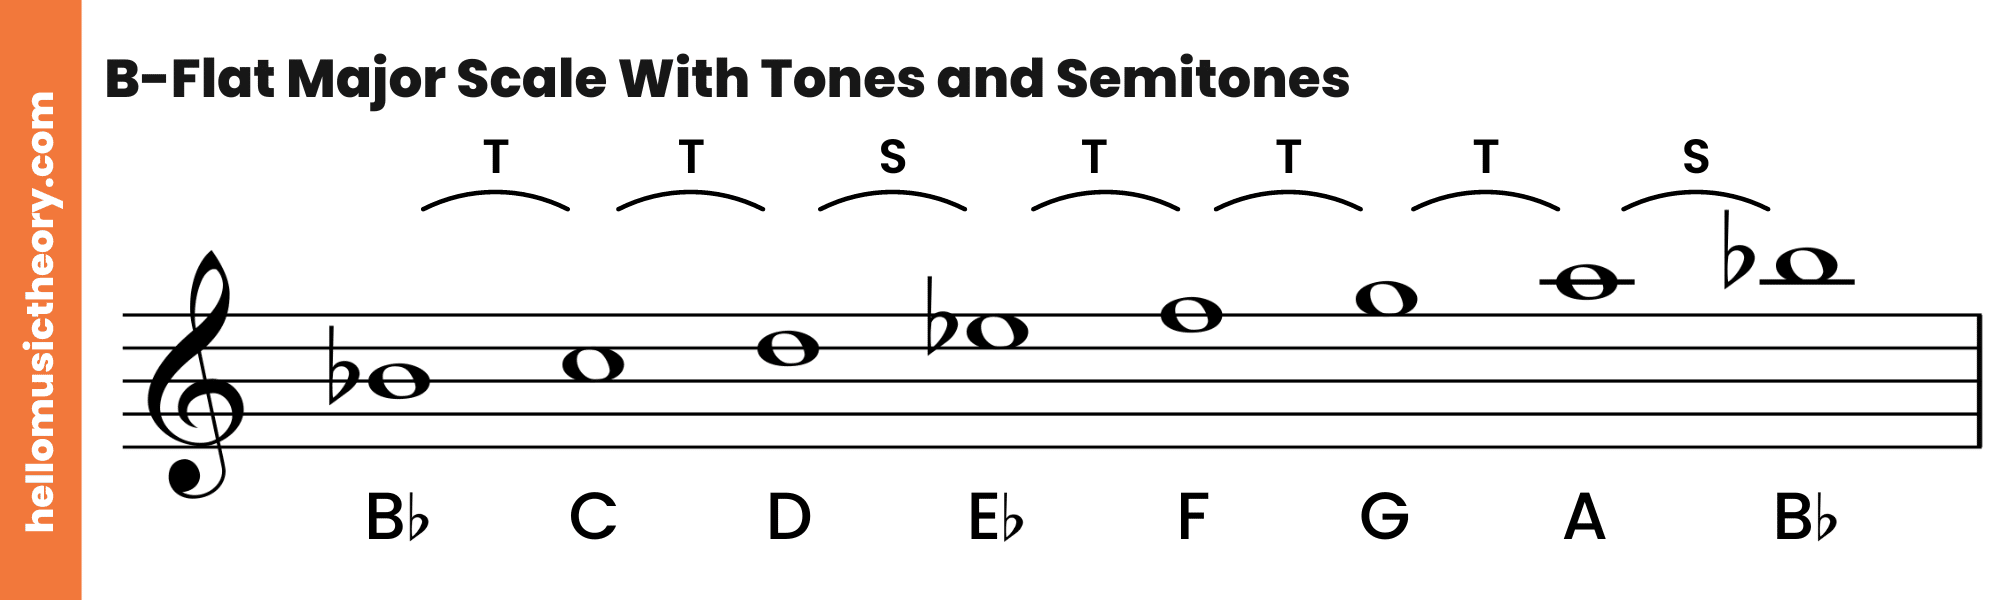 B-Flat Major Scale Treble Clef With Tones and Semitones